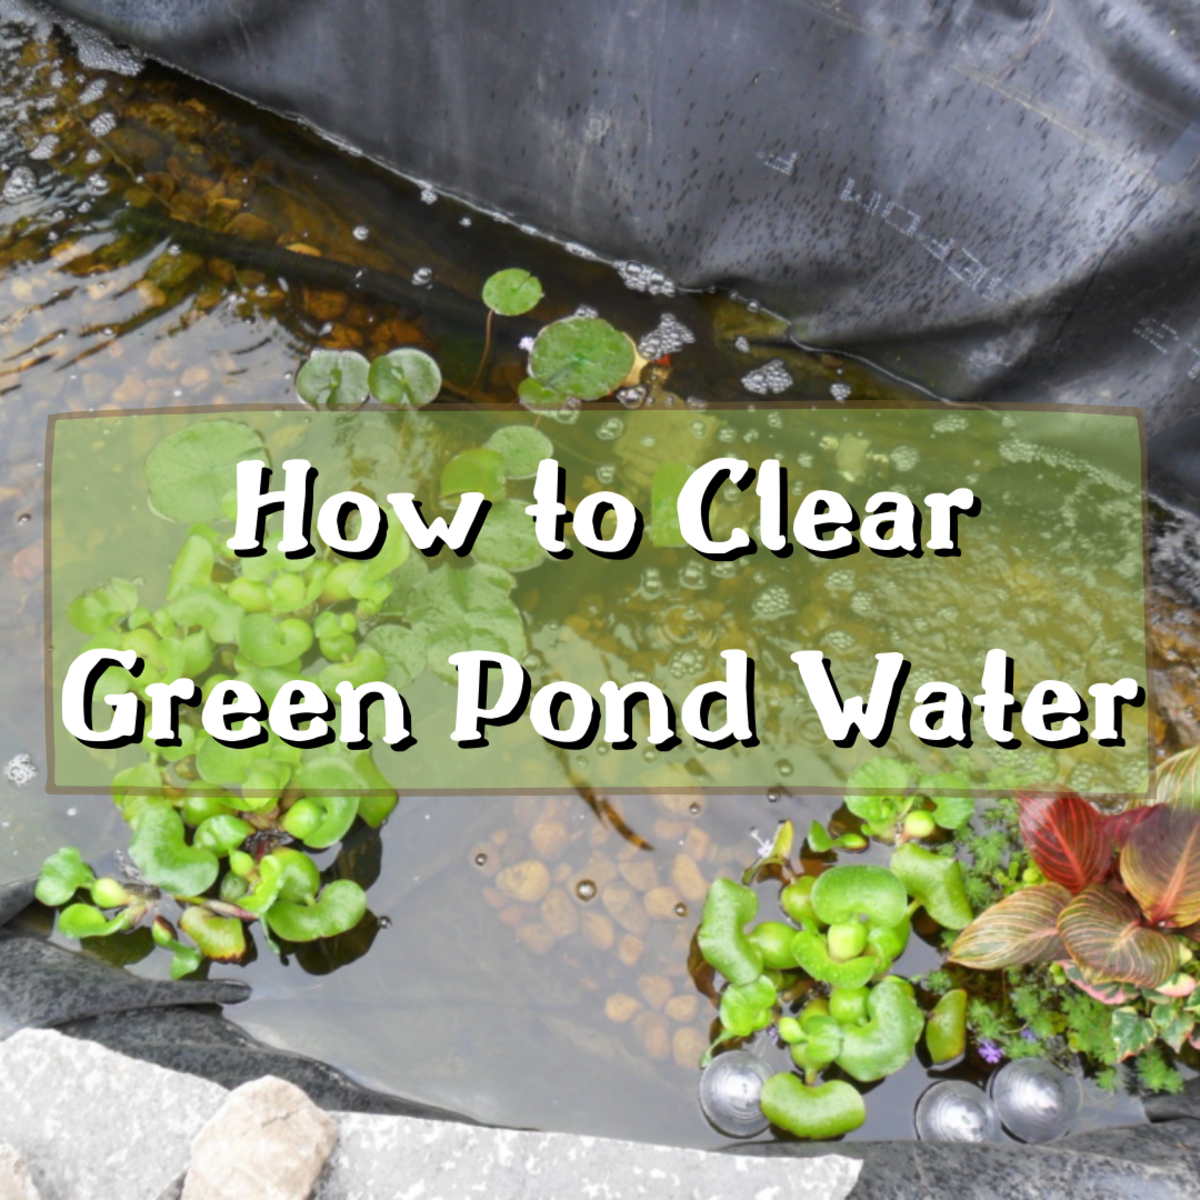 This article teaches you how to efficiently clean and clear up green pond water.